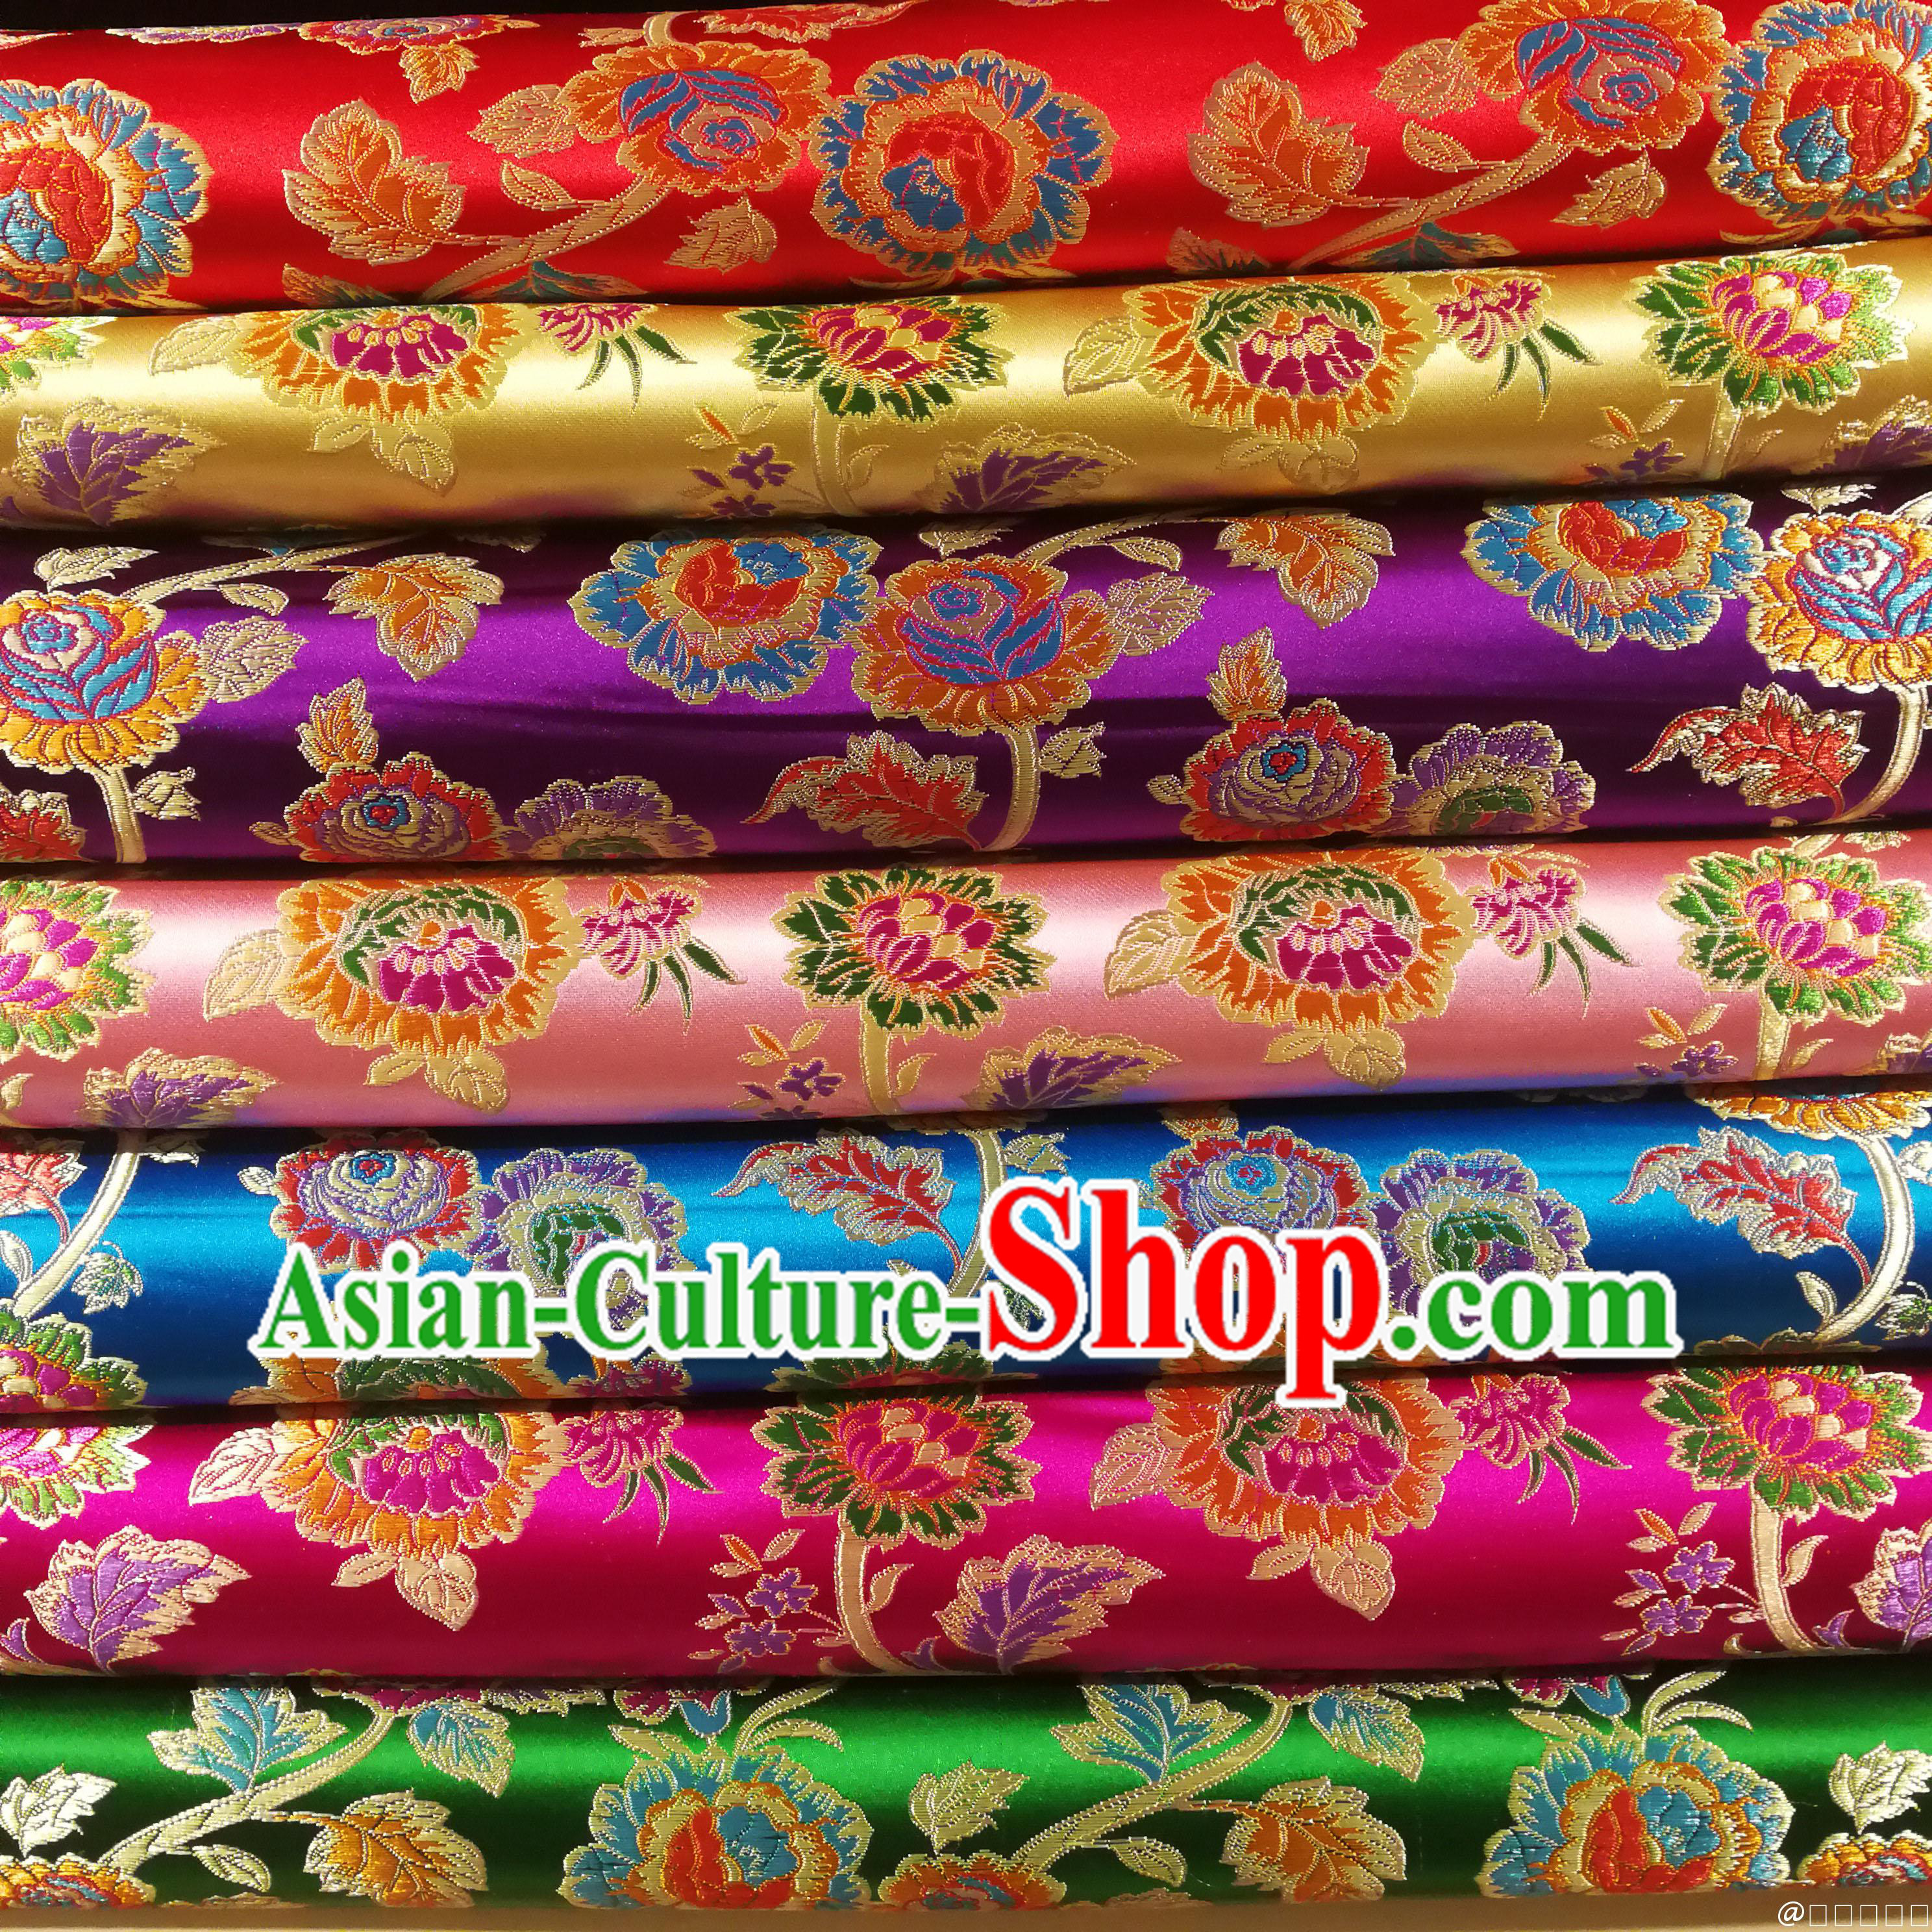 Chinese Royal Palace Style Traditional Pattern Peony Flower Design Brocade Fabric Silk Fabric Chinese Fabric Asian Material